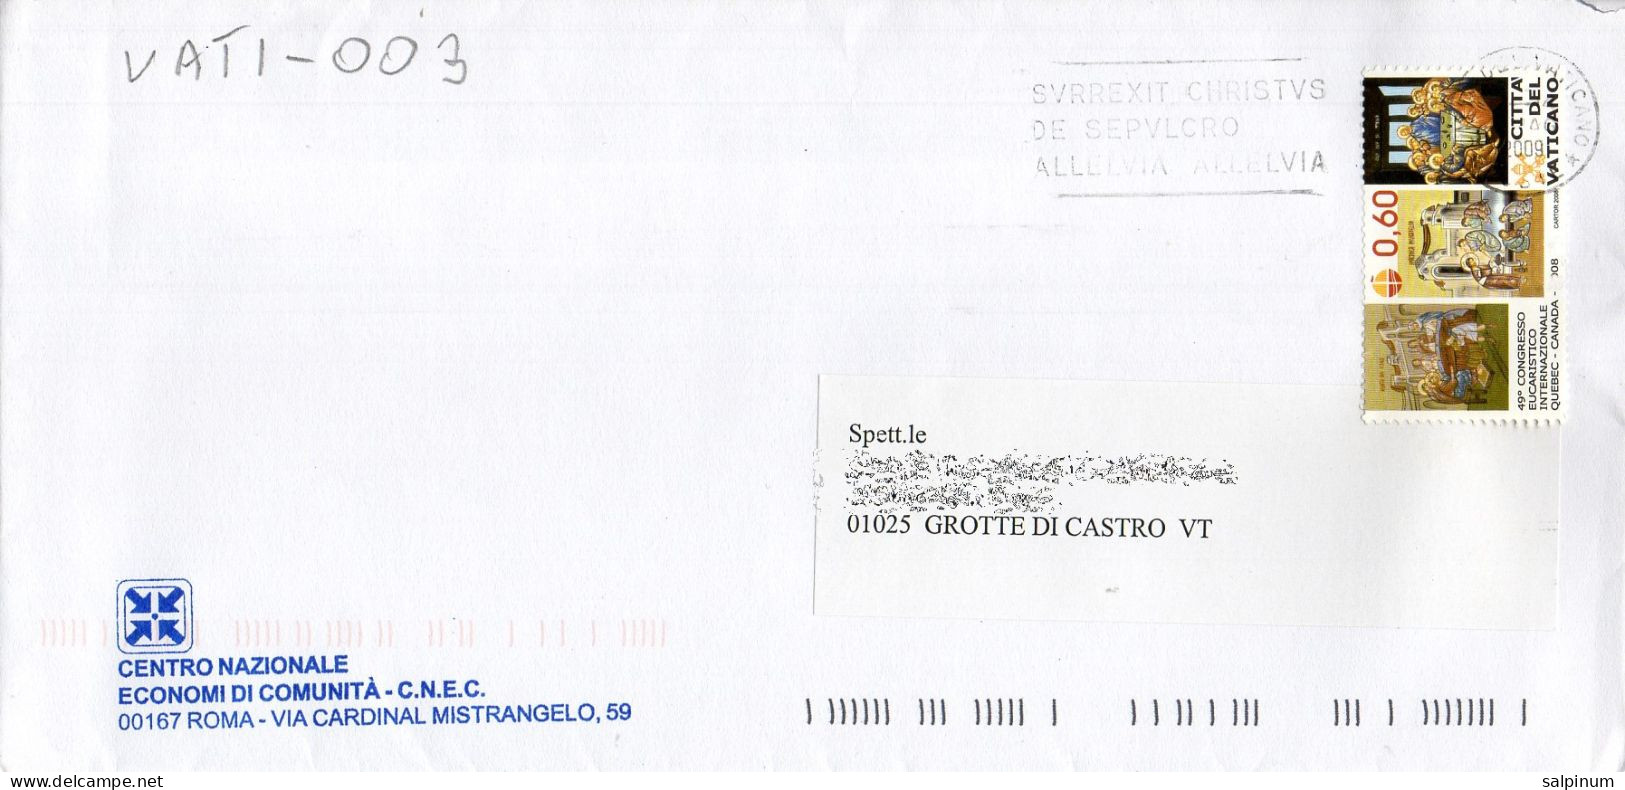 Philatelic Enveloppe With Stamps Sent From VATICAN CITY STATE To ITALY - Covers & Documents